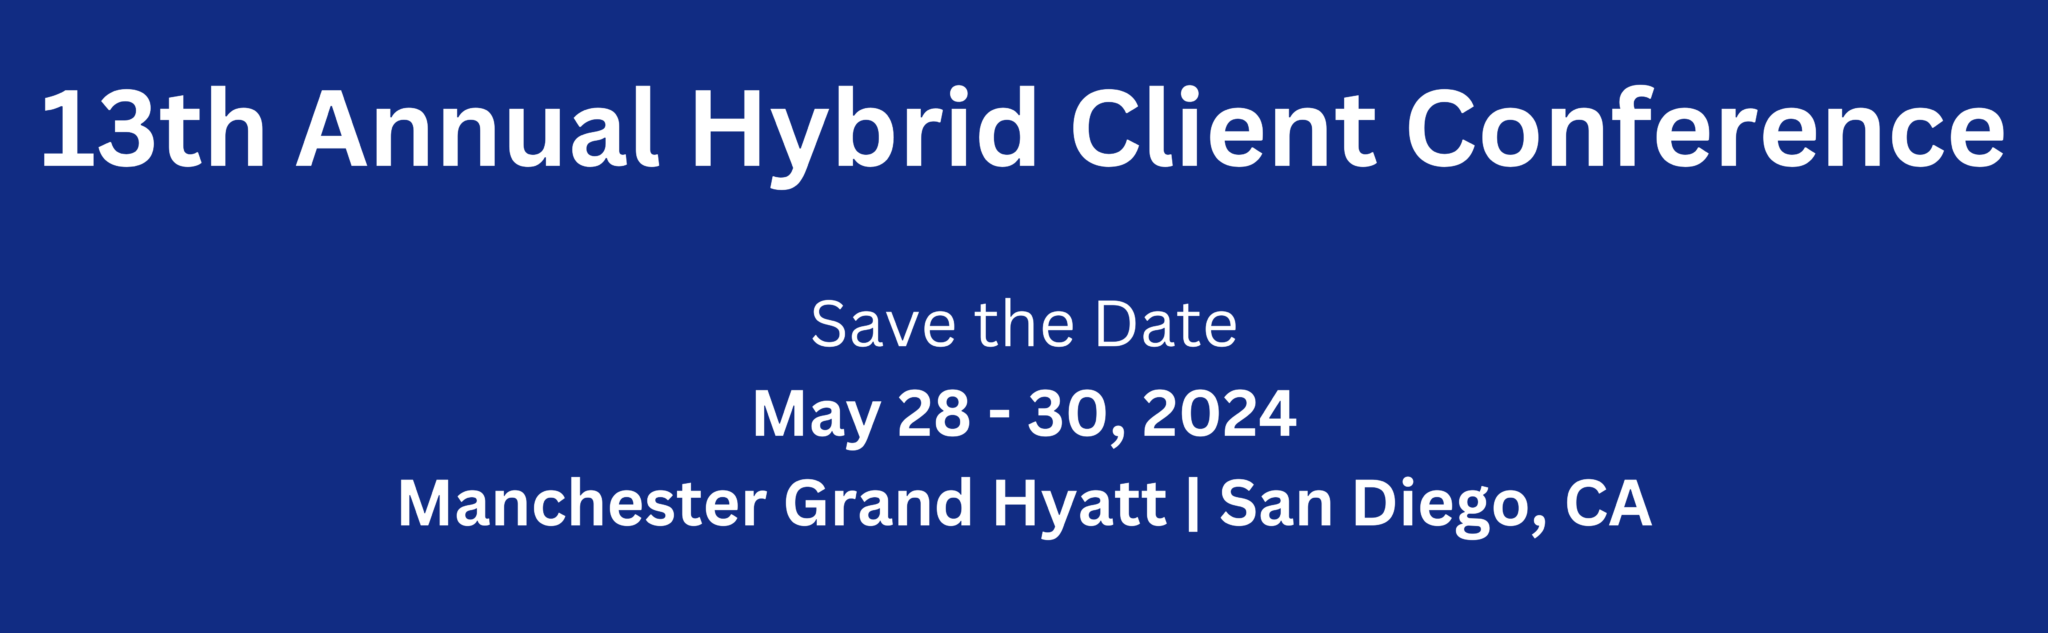 13th Annual Corelation Hybrid Client Conference San Diego, CA